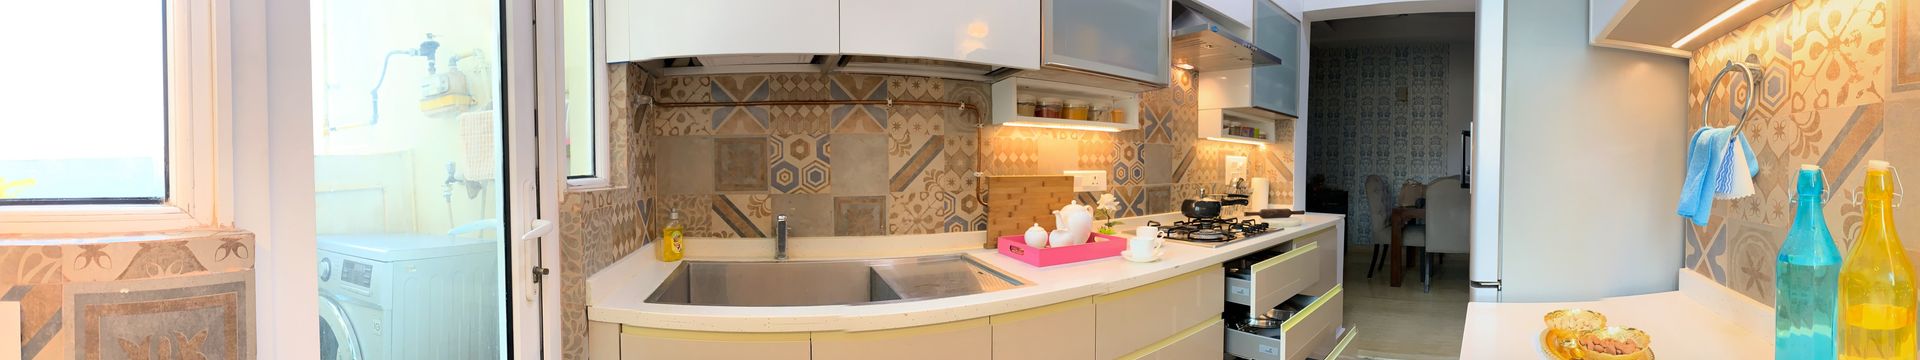 Vanilla color theme with the contrasting yellow highlights homify Kitchen